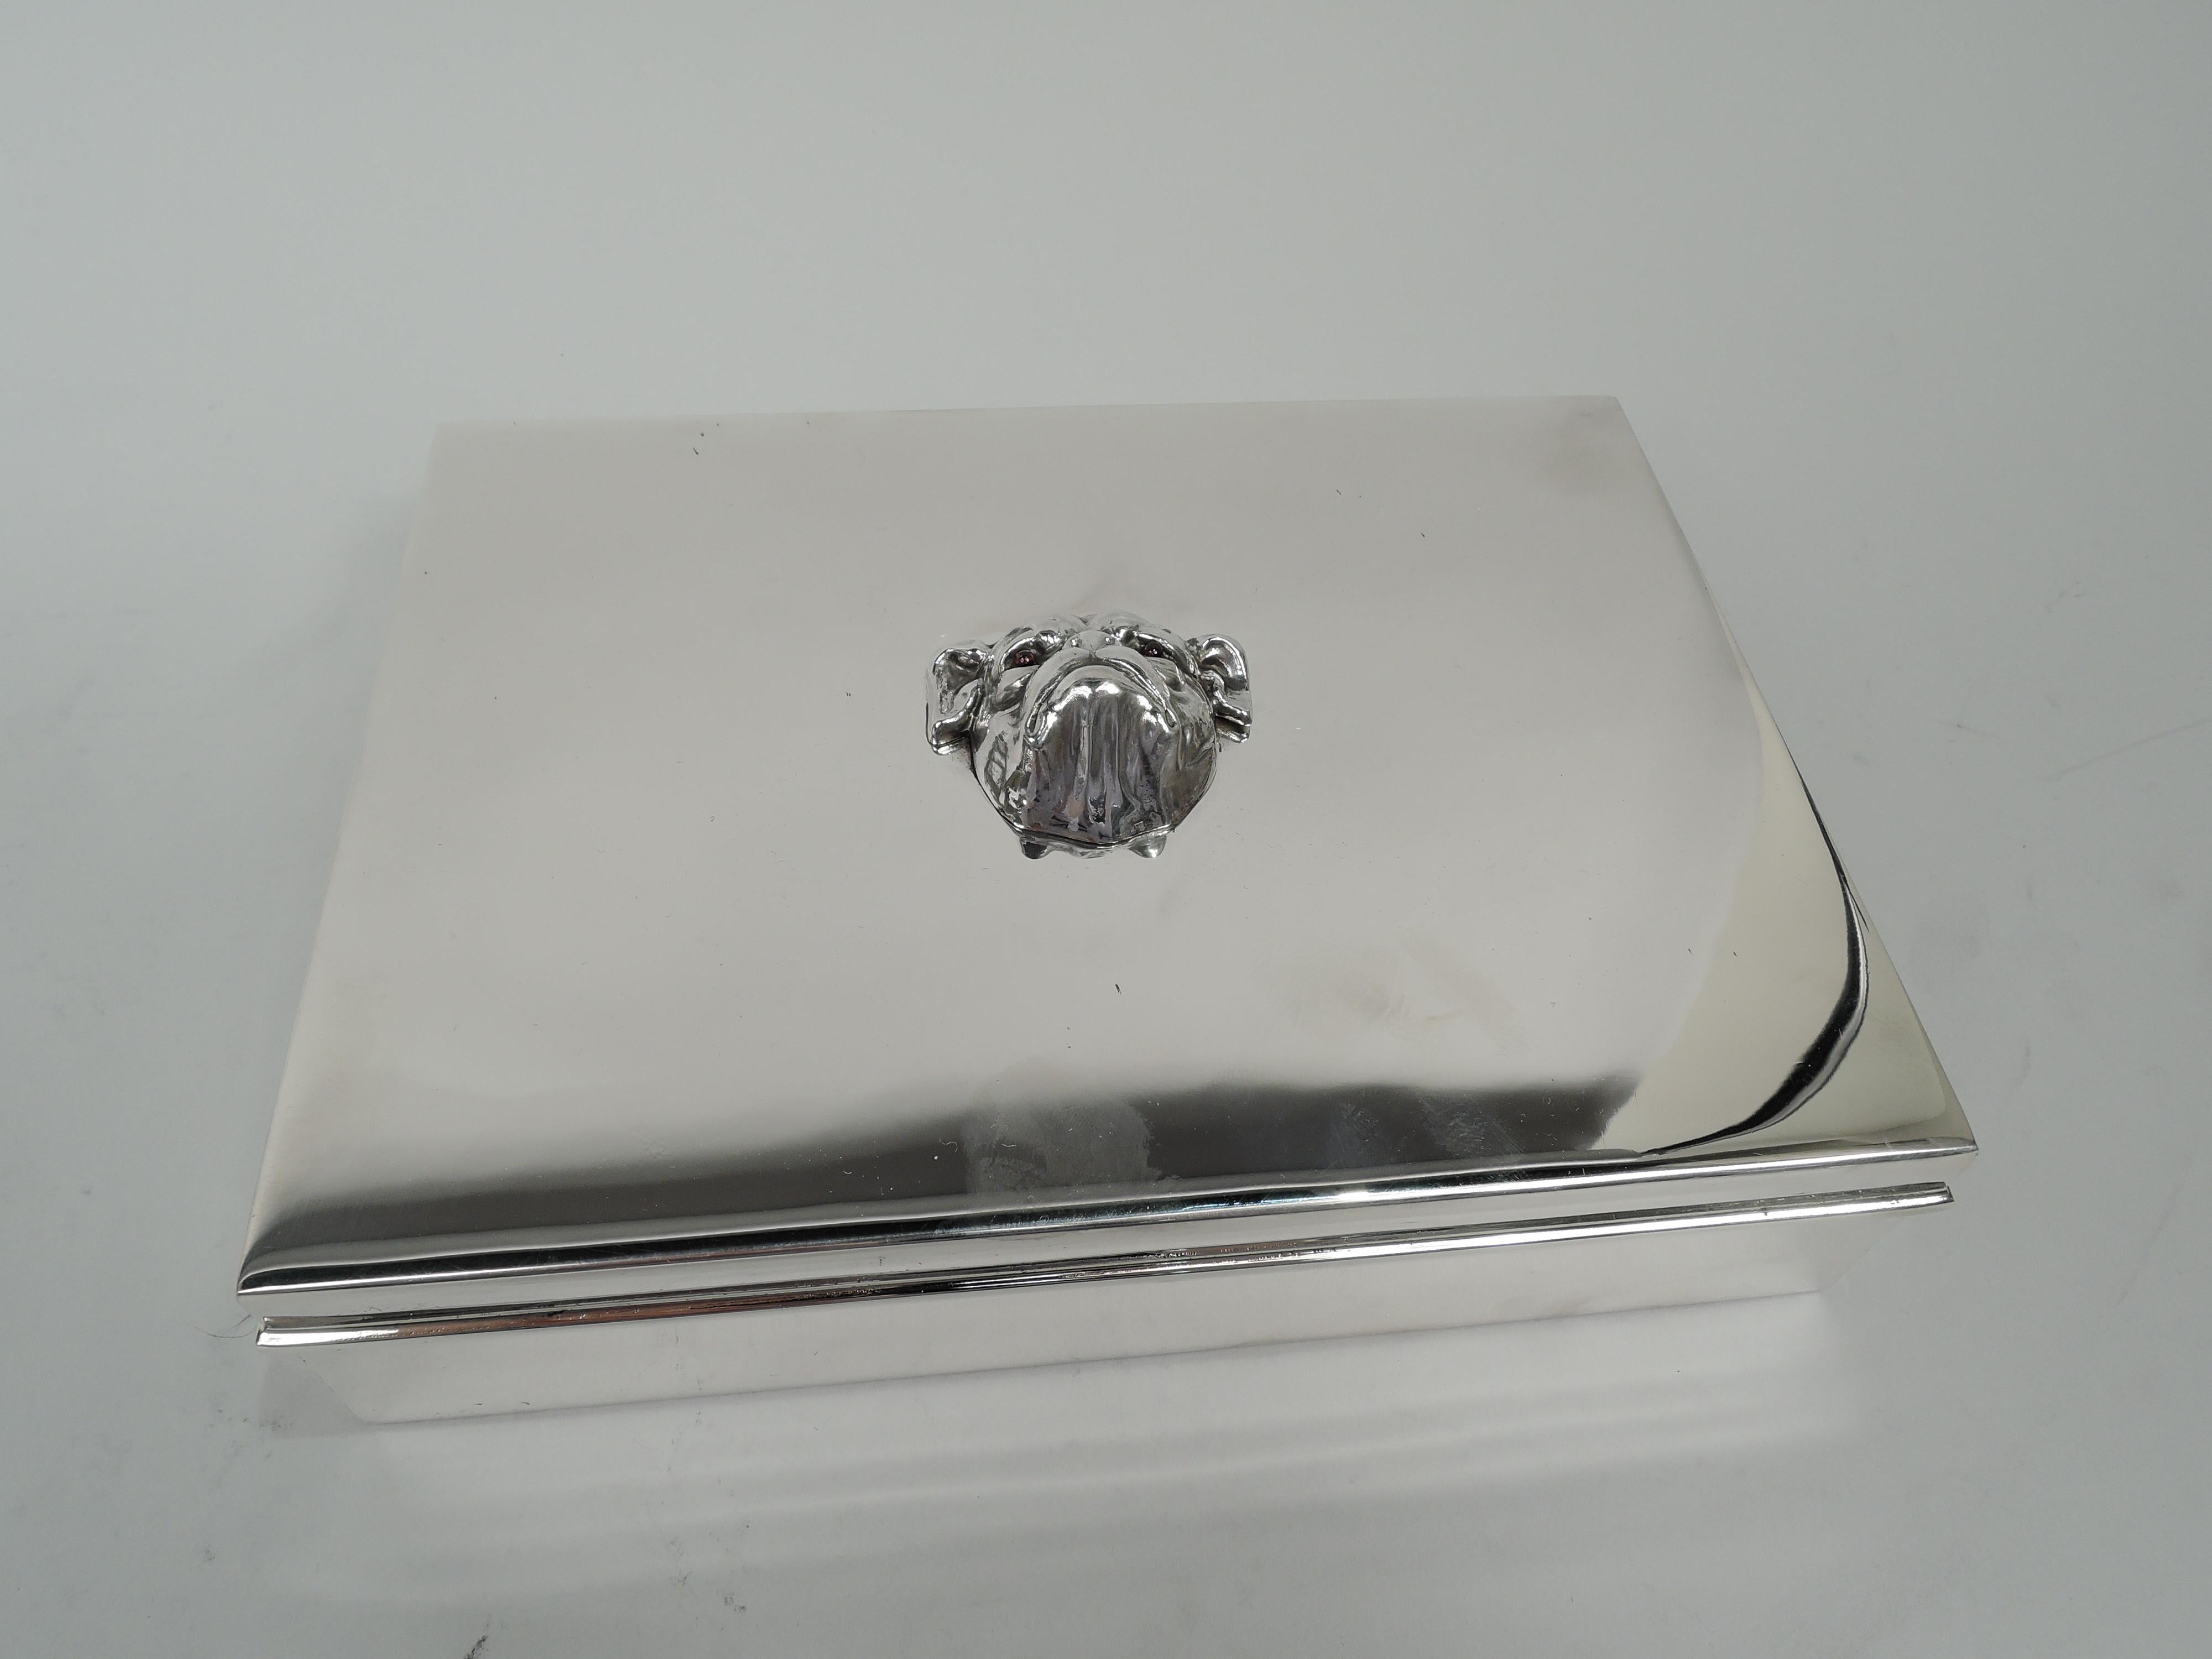 Large and Modern sterling silver box. Made by Tiffany & Co. in New York. Rectangular with straight sides. Cover flat and hinged with wraparound rectilinear rim; mounted to top is cast bulldog head with wrinkled brow, floppy ears, mournful frown, and